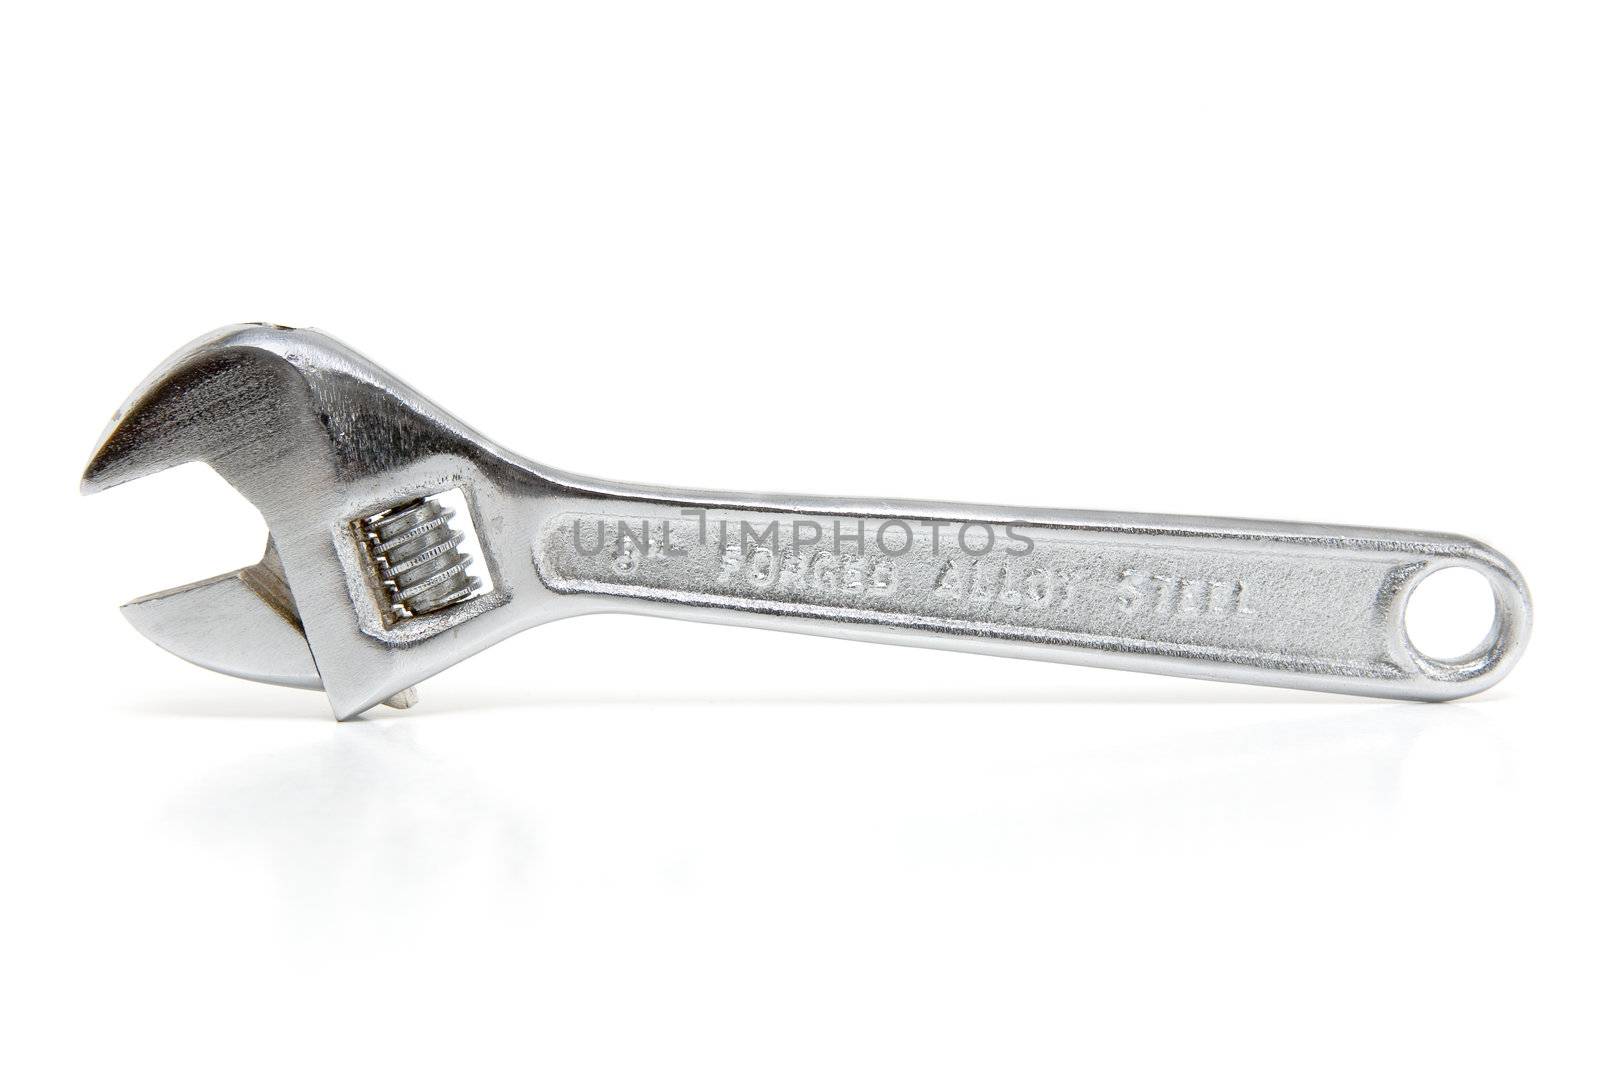 Adjustable wrench on a white background